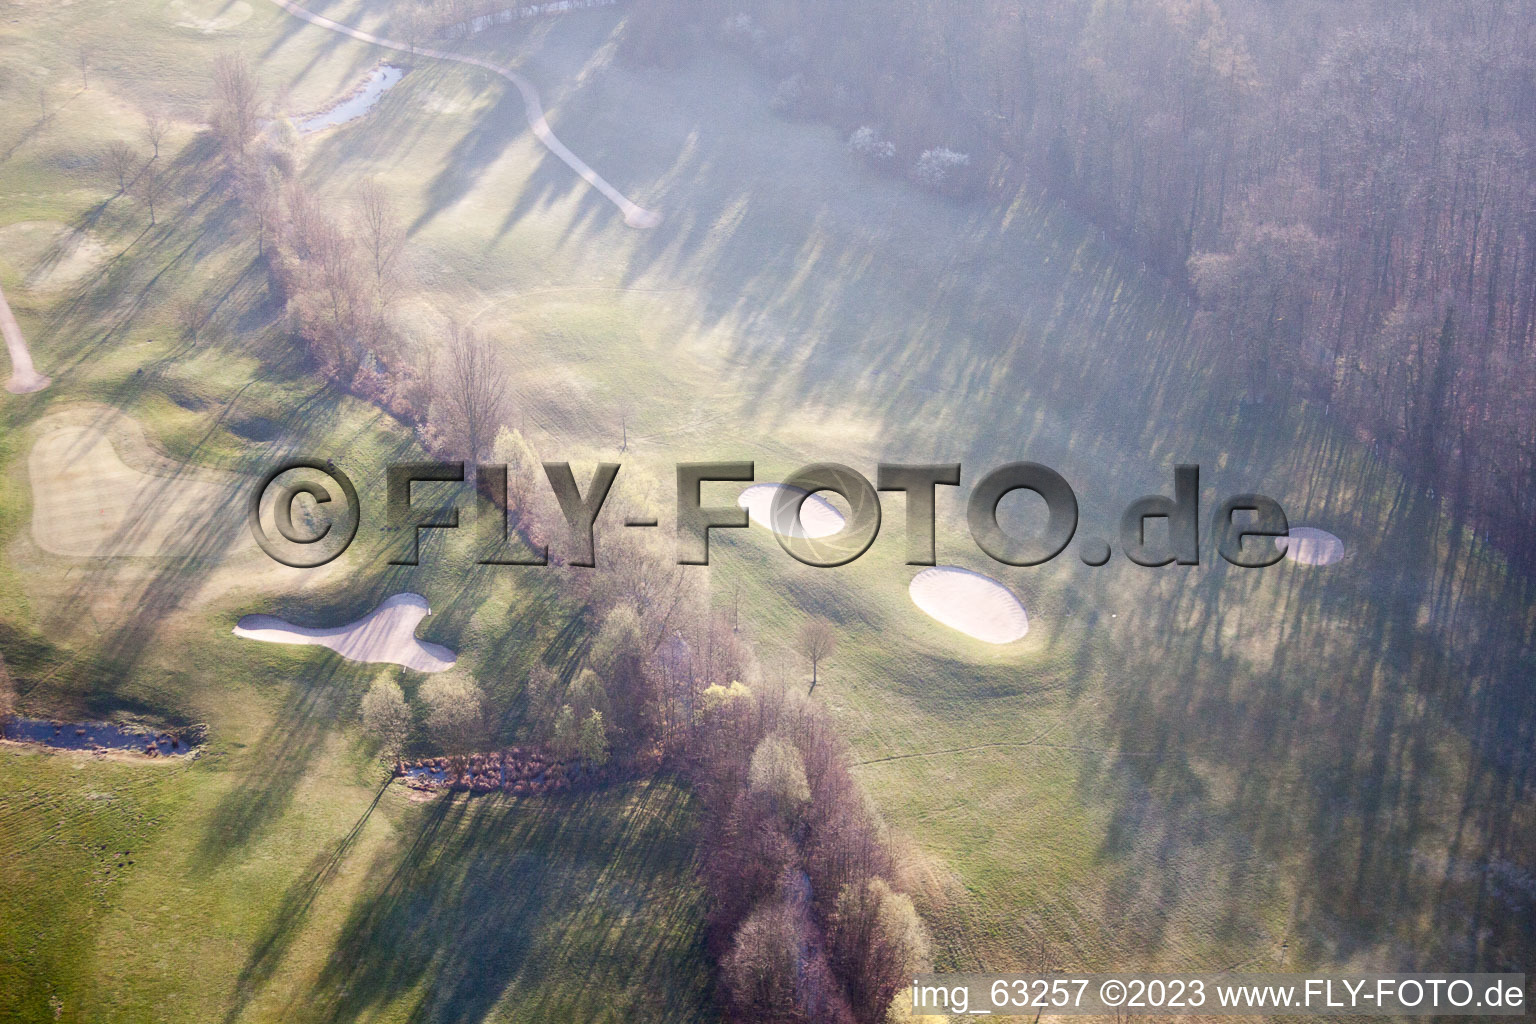 Dreihof Golf Club in Essingen in the state Rhineland-Palatinate, Germany viewn from the air